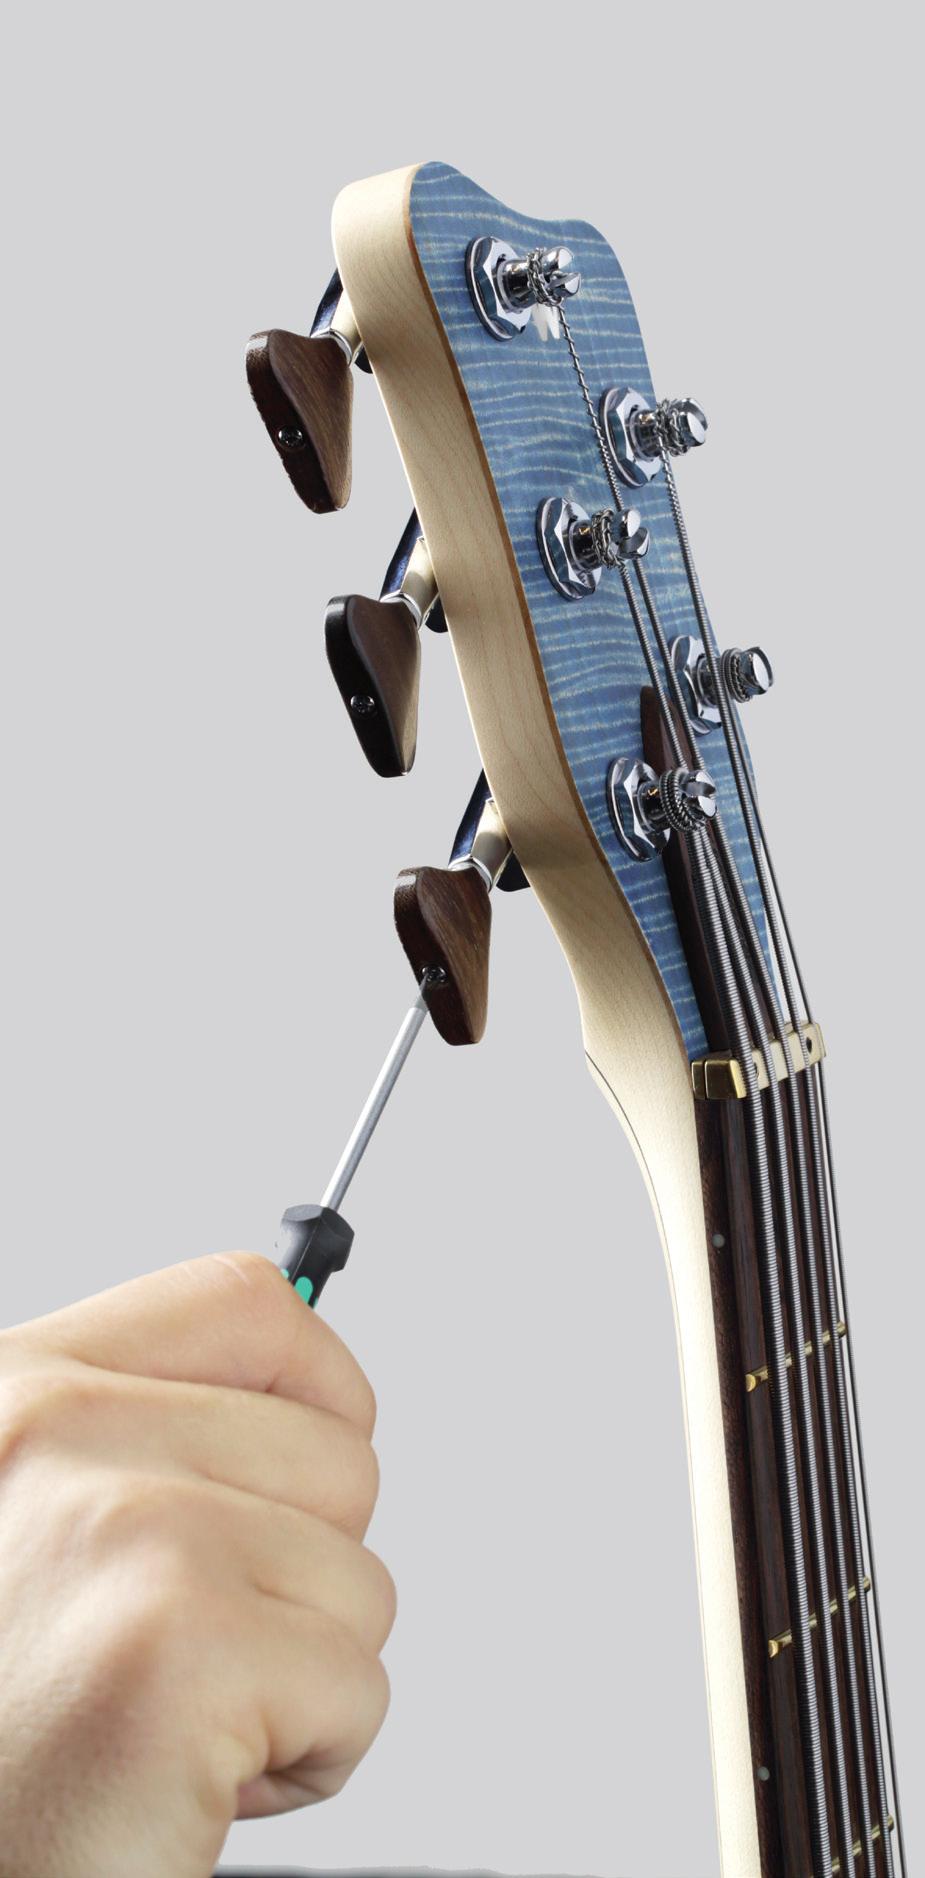 Warwick tuners feature a sealed, self-lubricating gear that warrants high tuning stability and needs no maintenance.